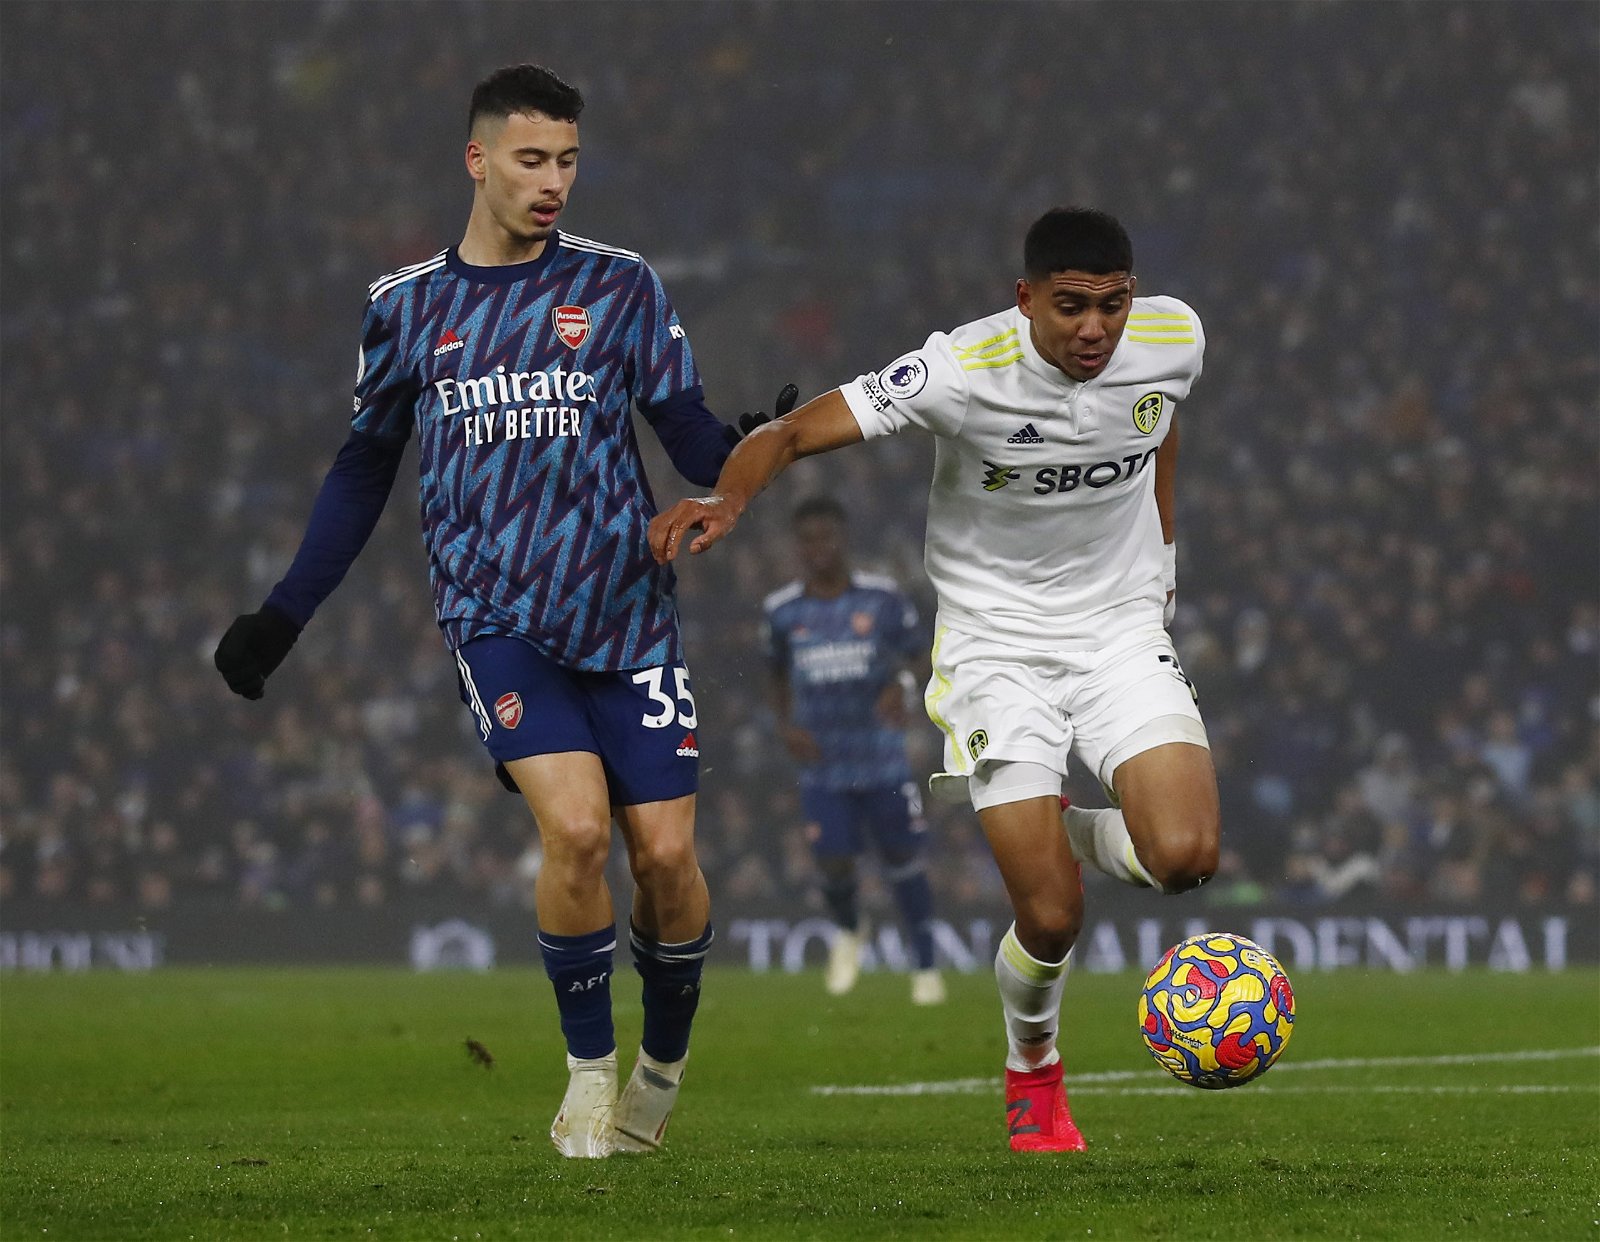 Leeds United's Cody Drameh in action with Arsenal's Gabriel Martinelli